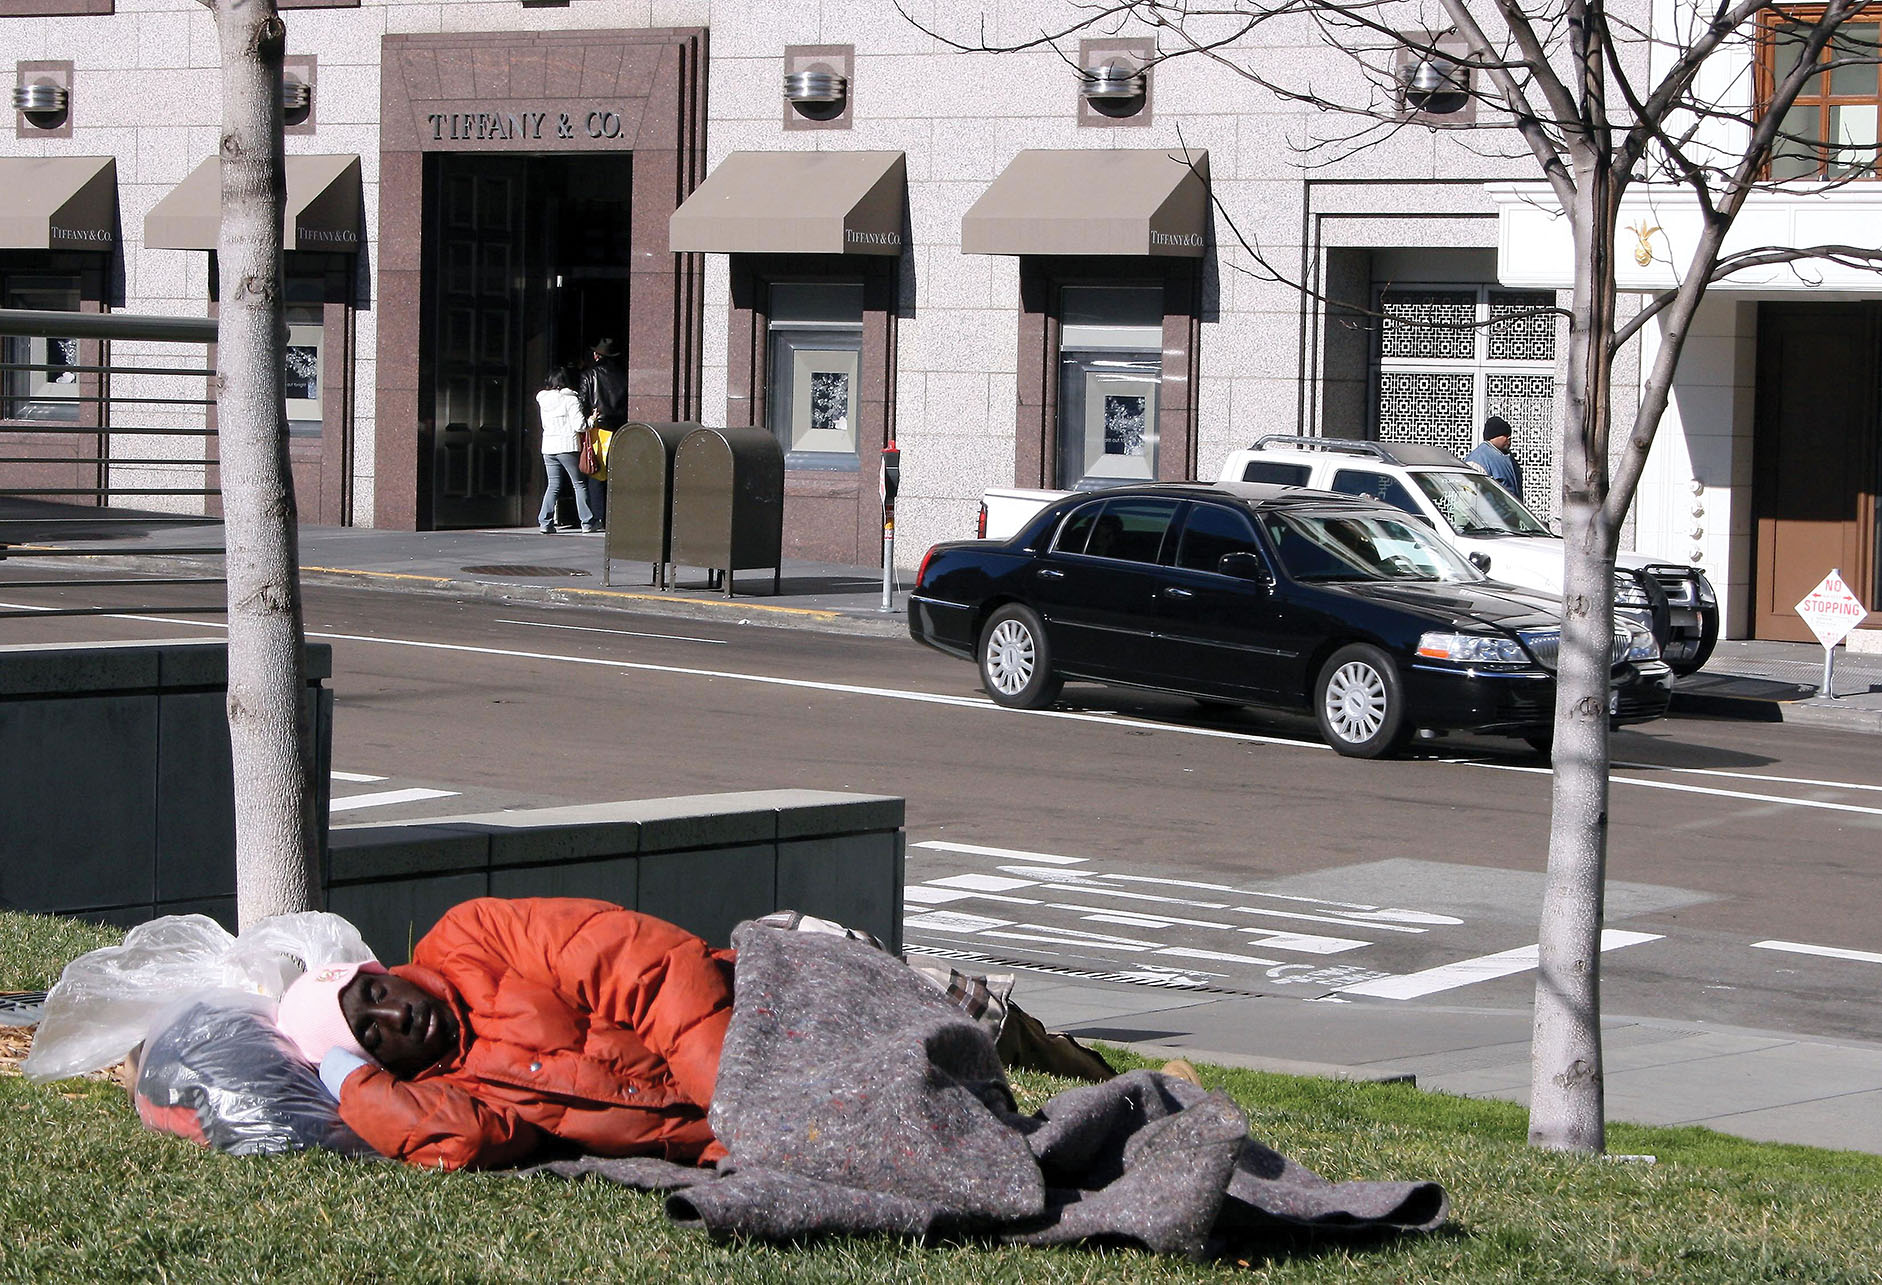 A homeless man sleeps on a bench just across the street from the luxurious Tiffany & Co jewelry store. in San Francisco. (Photo by Paula Steele.)